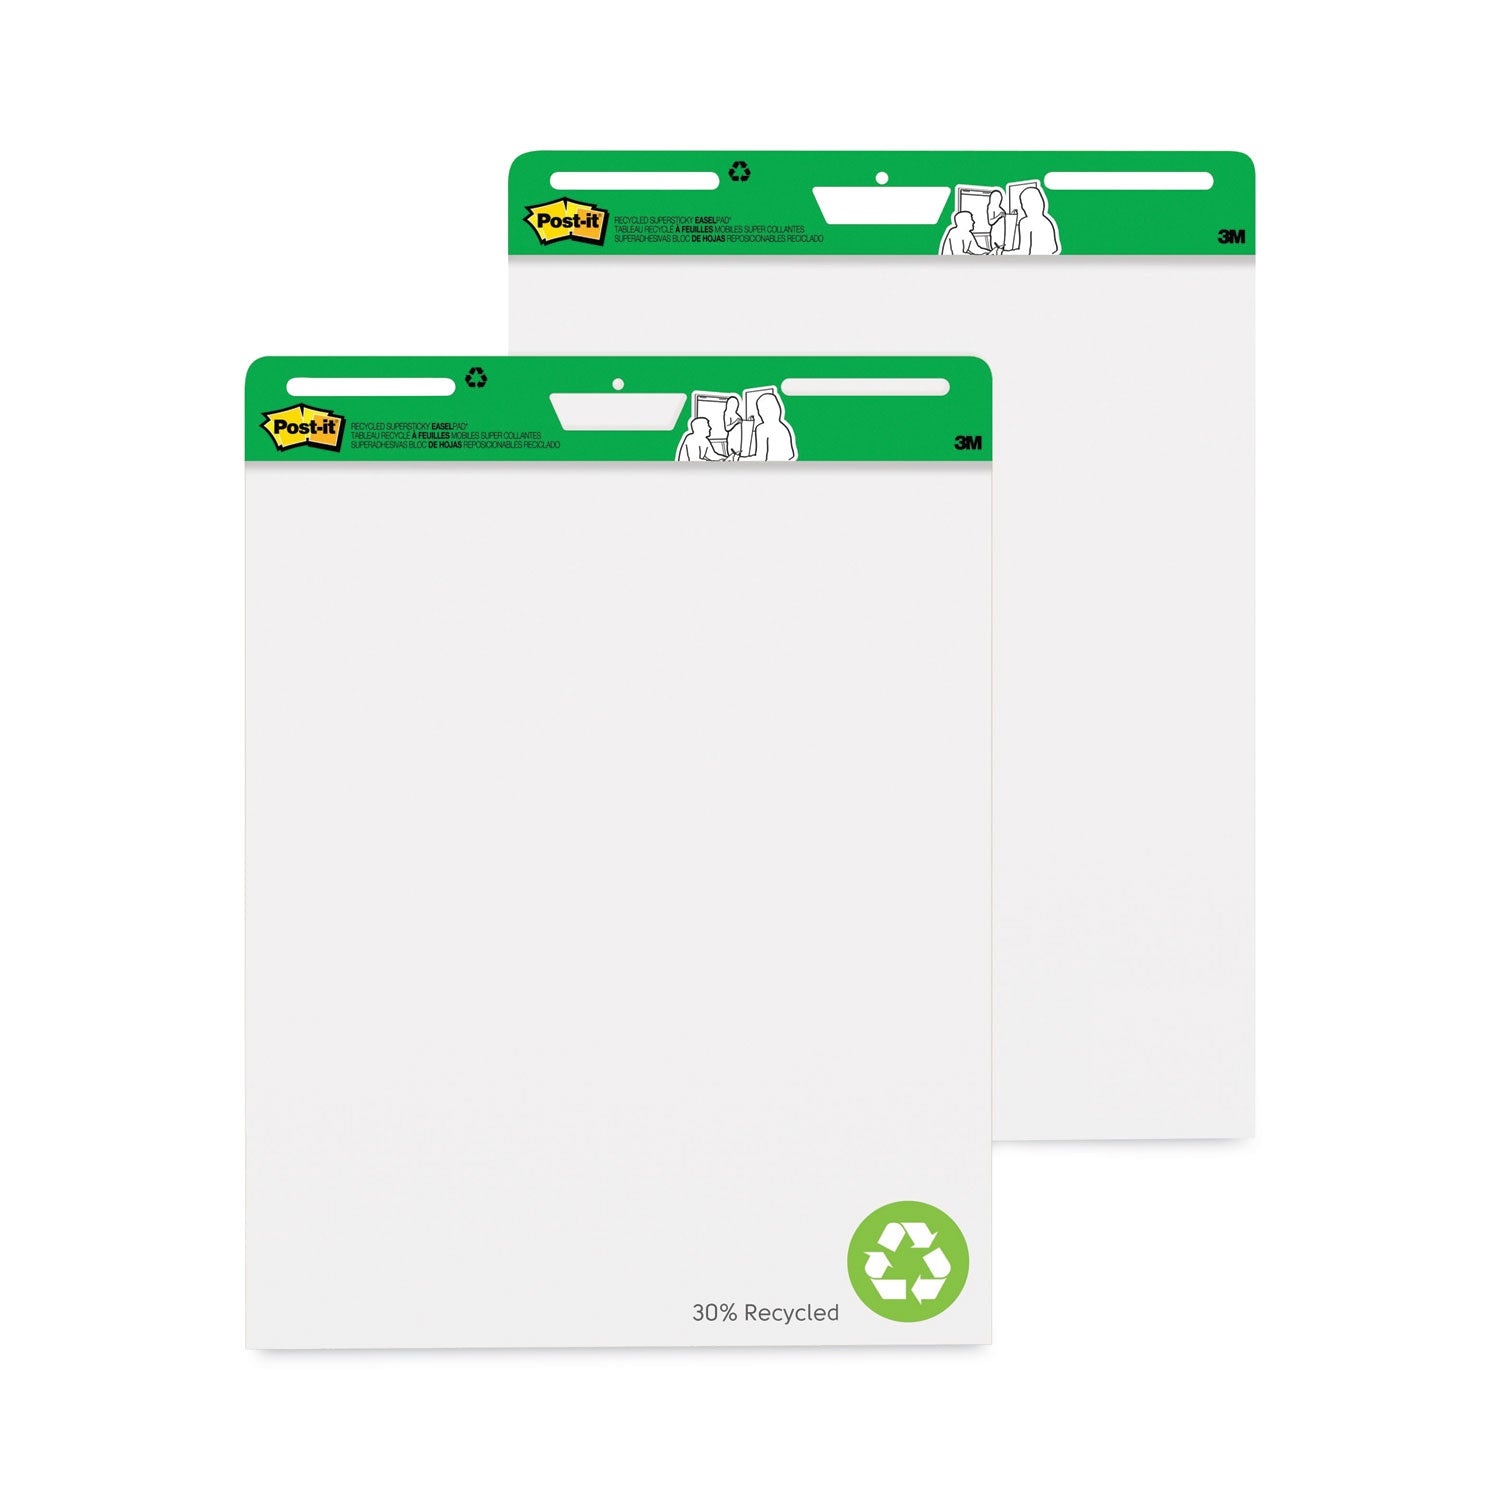 Vertical-Orientation Self-Stick Easel Pads, Green Headband, Unruled, 25 x 30, White, 30 Sheets, 2/Carton - 